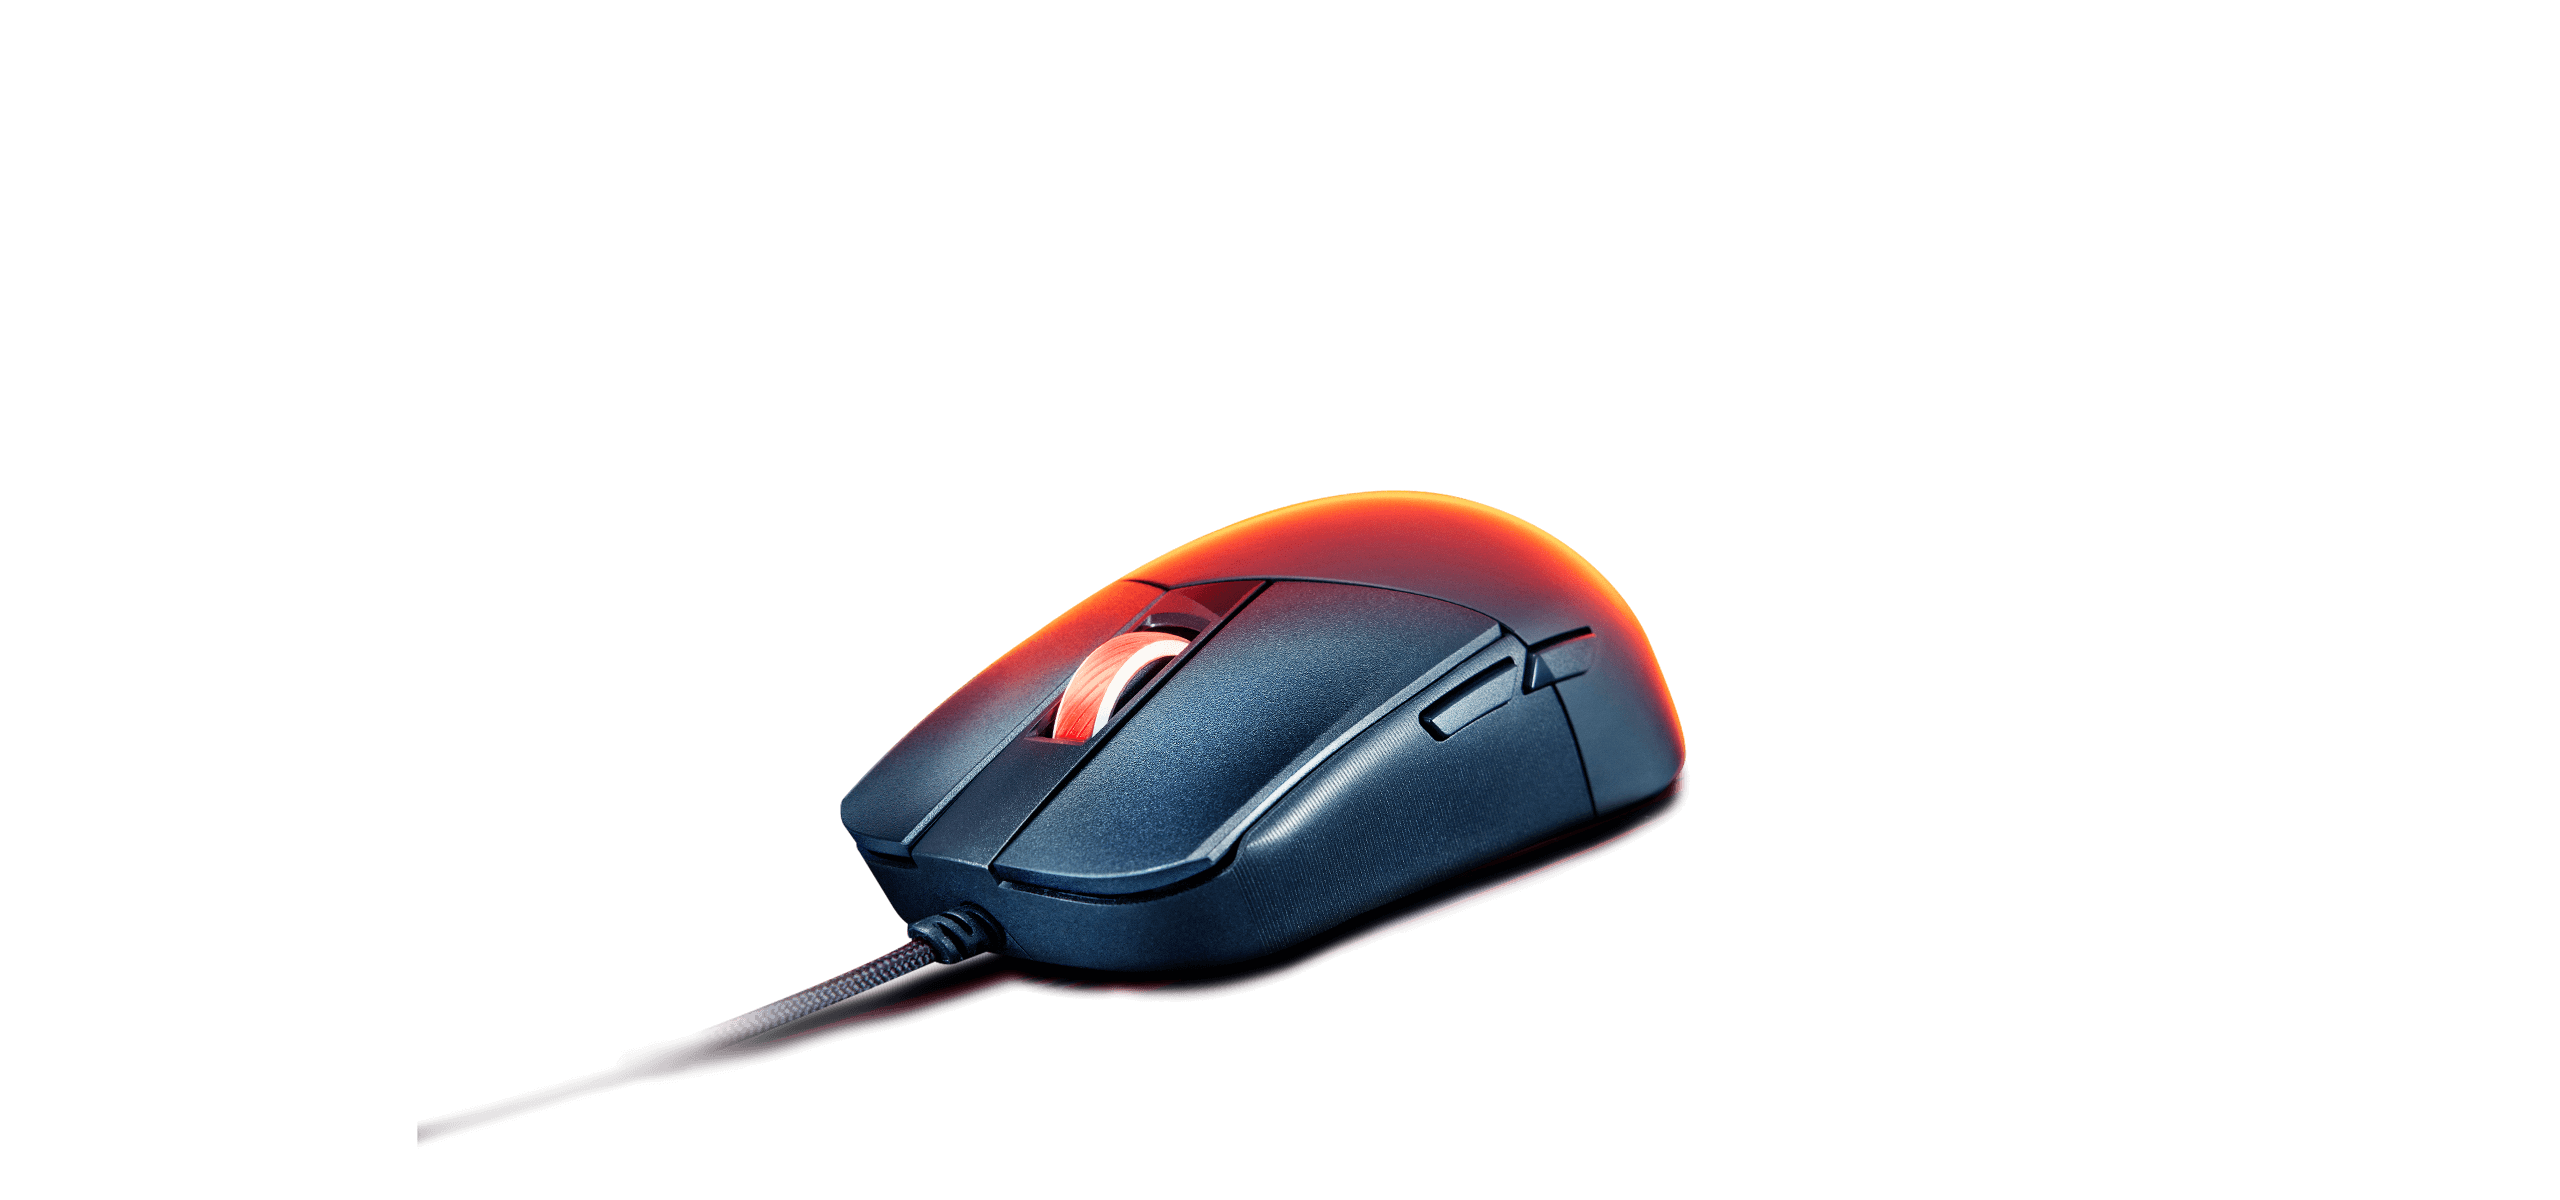 The ROG Strix Impact III on a dark surface, with orange lights coming out from behind it